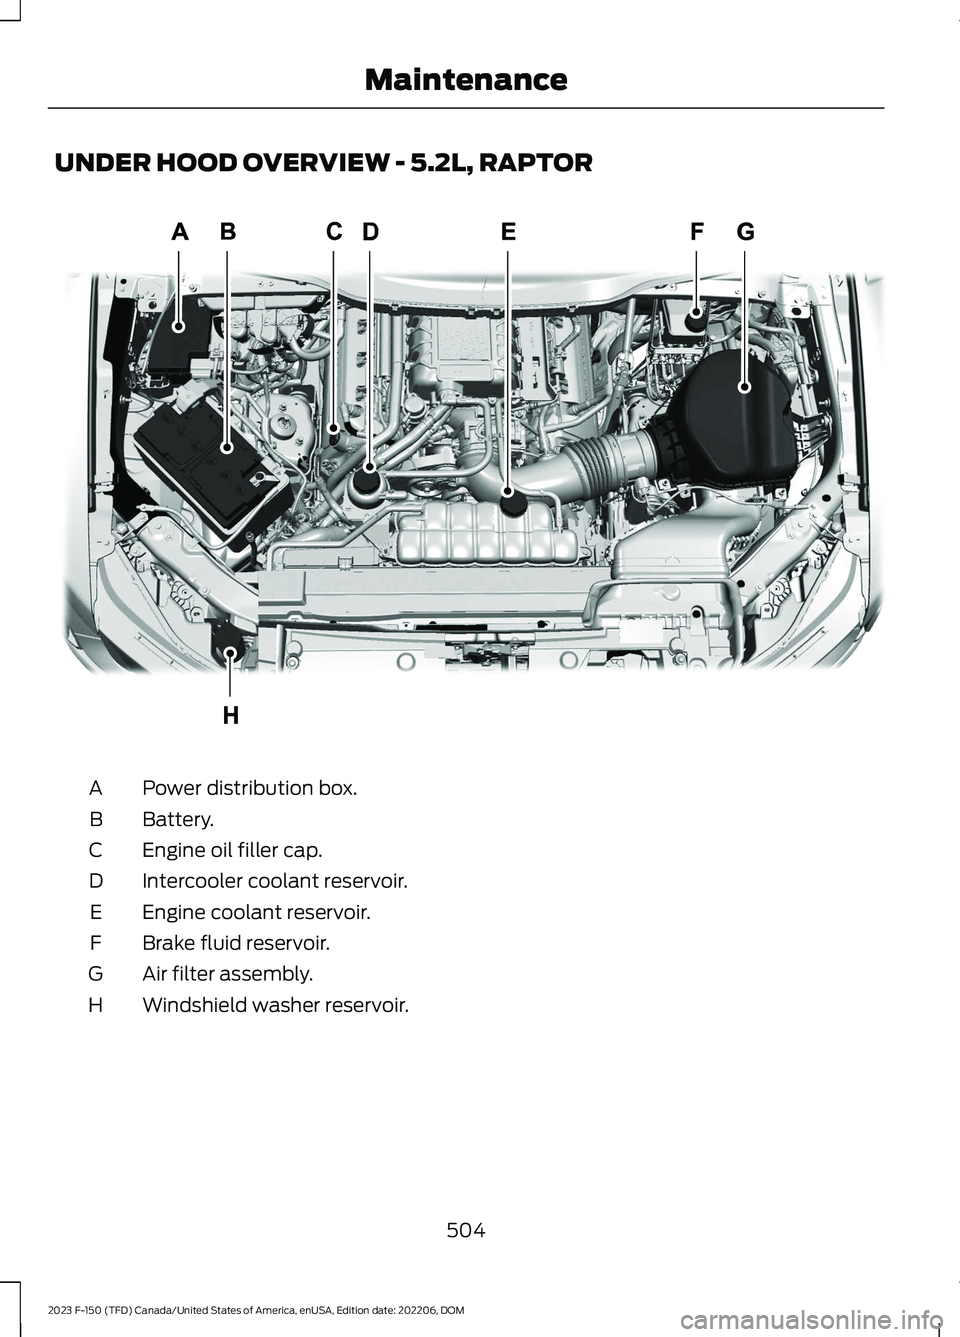 FORD F150 2023  Owners Manual UNDER HOOD OVERVIEW - 5.2L, RAPTOR
Power distribution box.A
Battery.B
Engine oil filler cap.C
Intercooler coolant reservoir.D
Engine coolant reservoir.E
Brake fluid reservoir.F
Air filter assembly.G
W